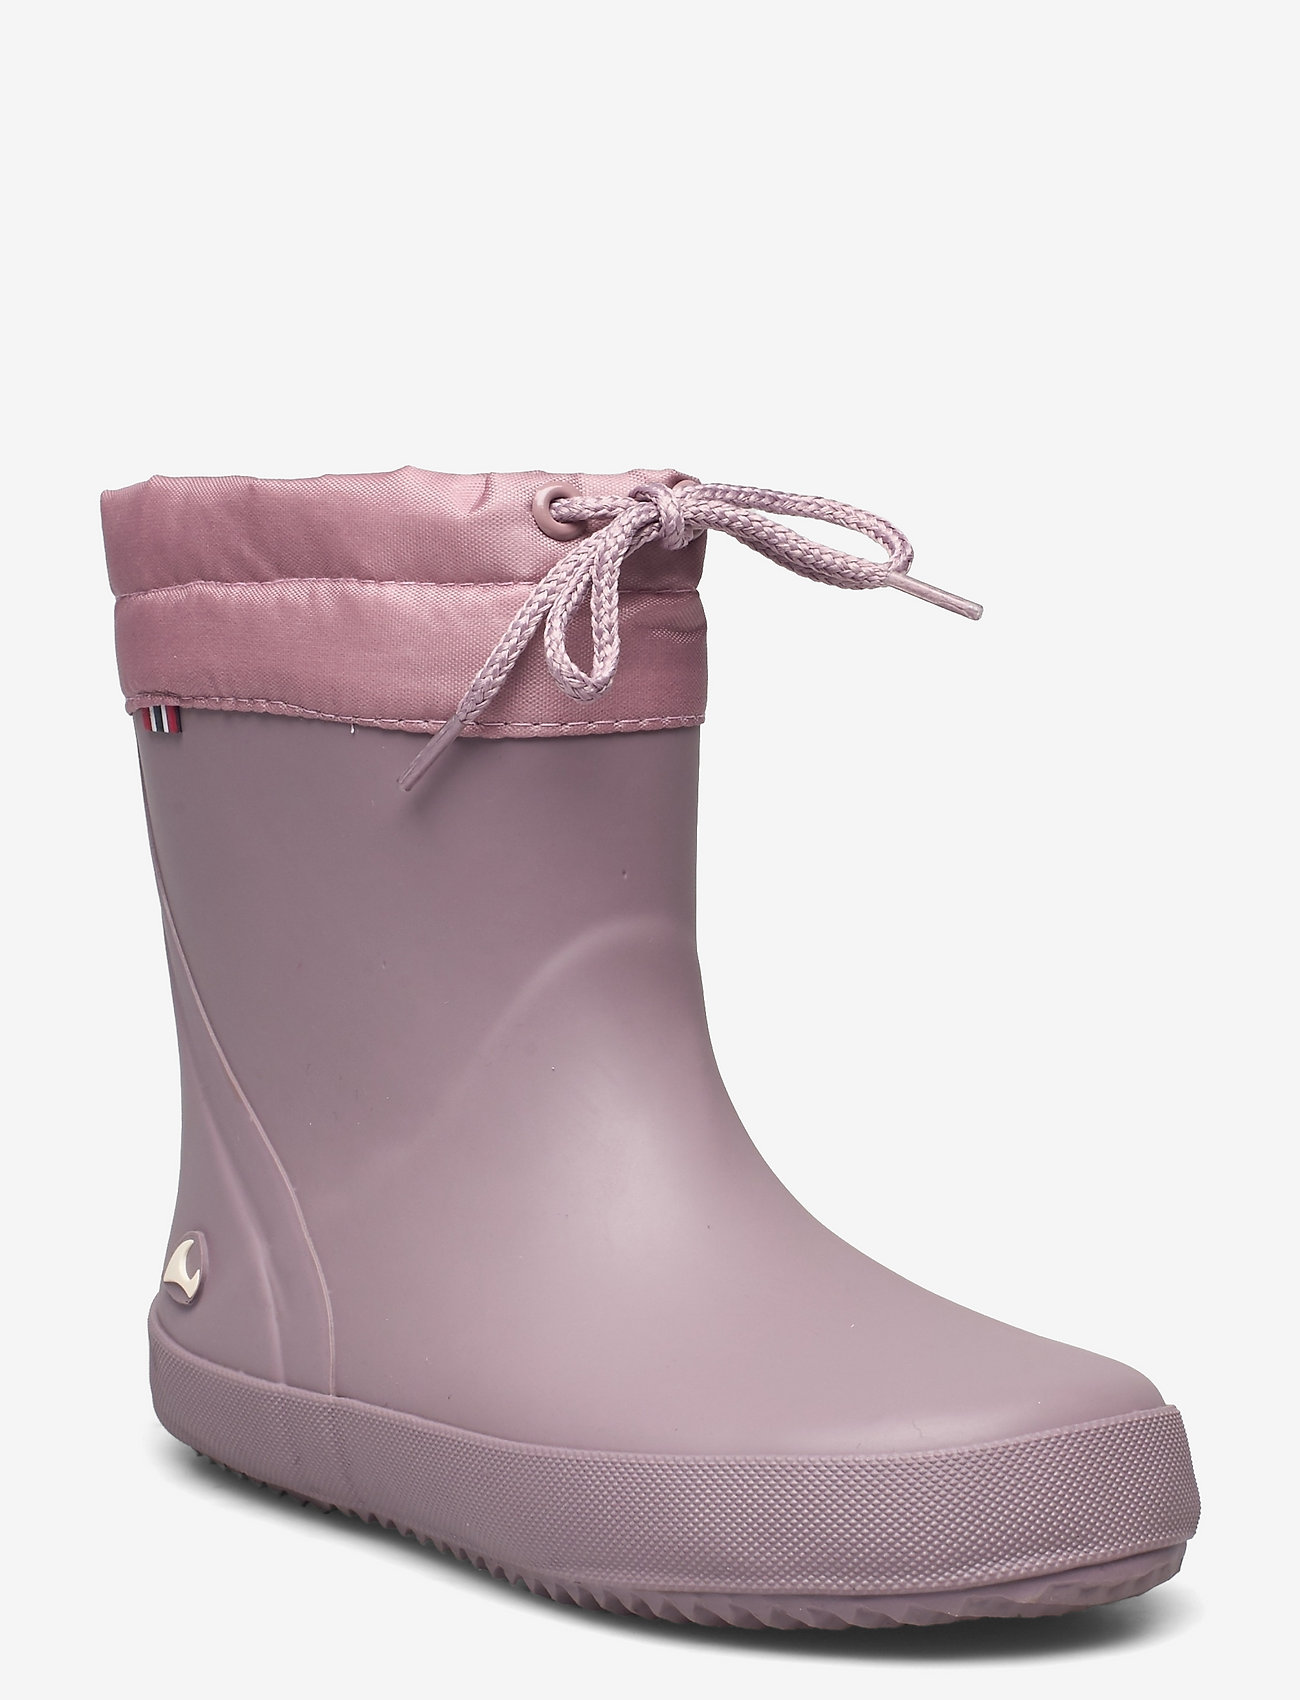 Viking - Alv Indie - unlined rubberboots - dusty pink/light pink - 0